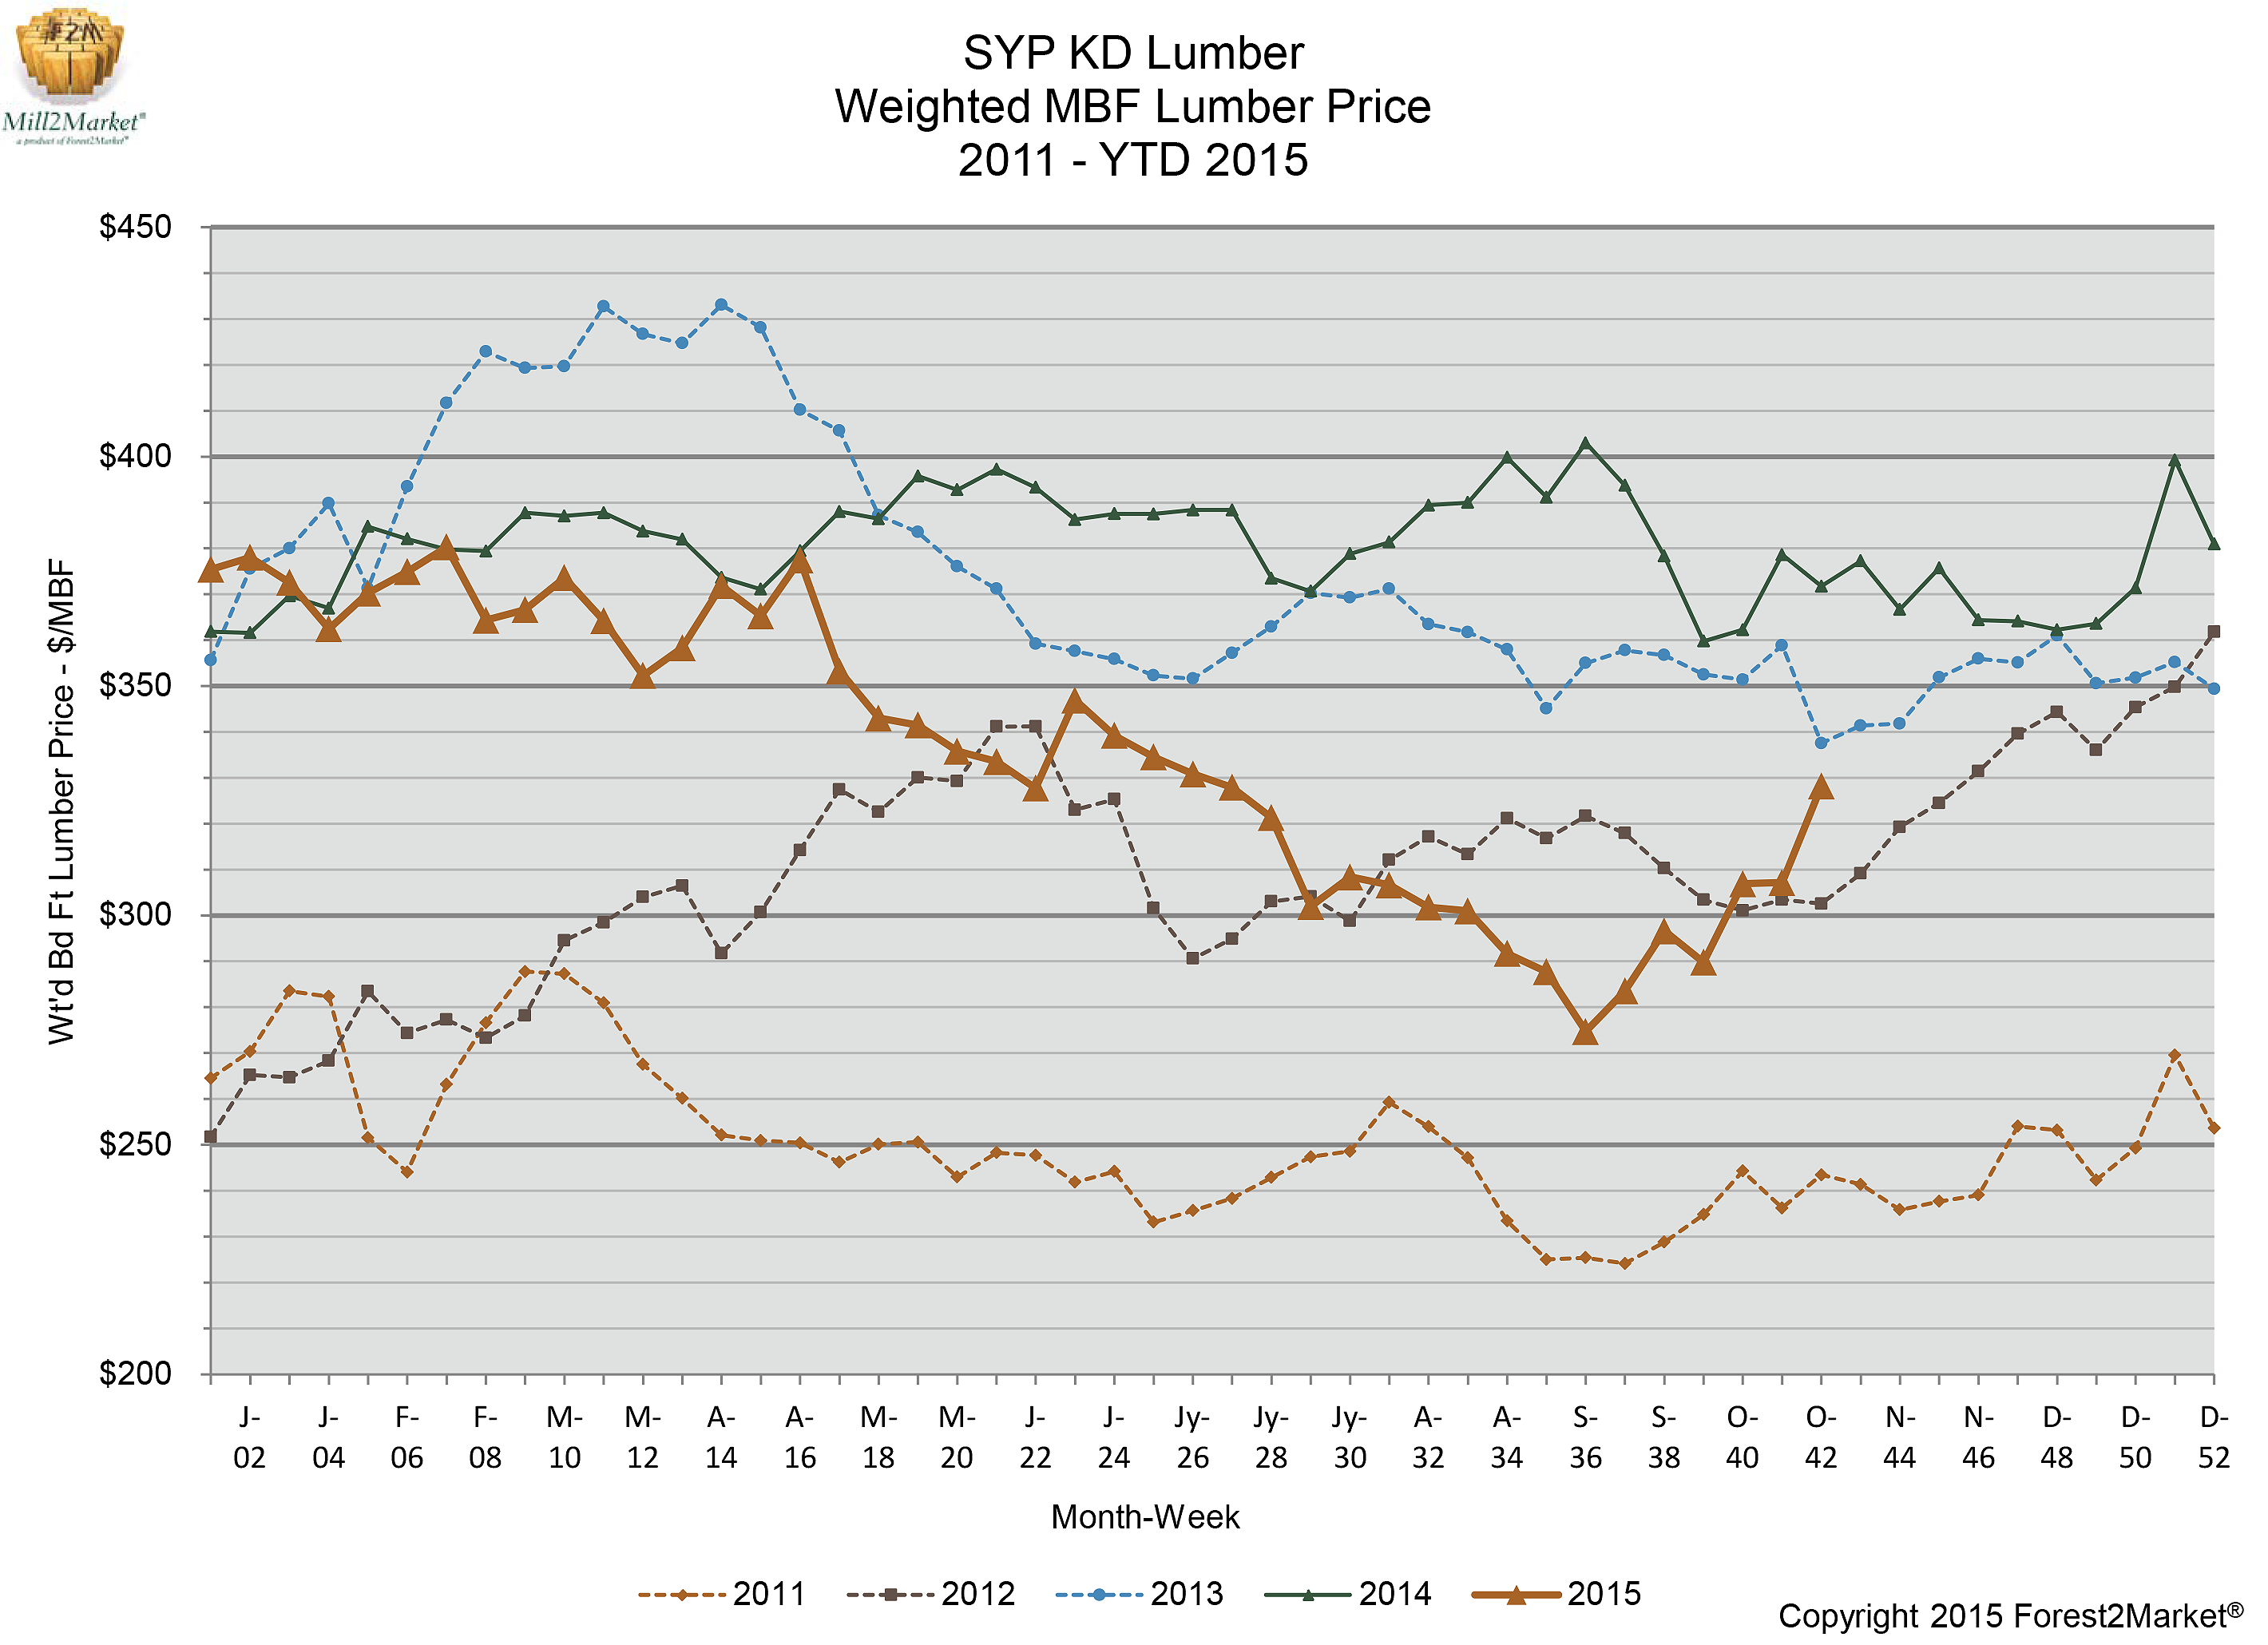 Despite Expiration of the SLA, Lumber Prices and Housing Starts Increase